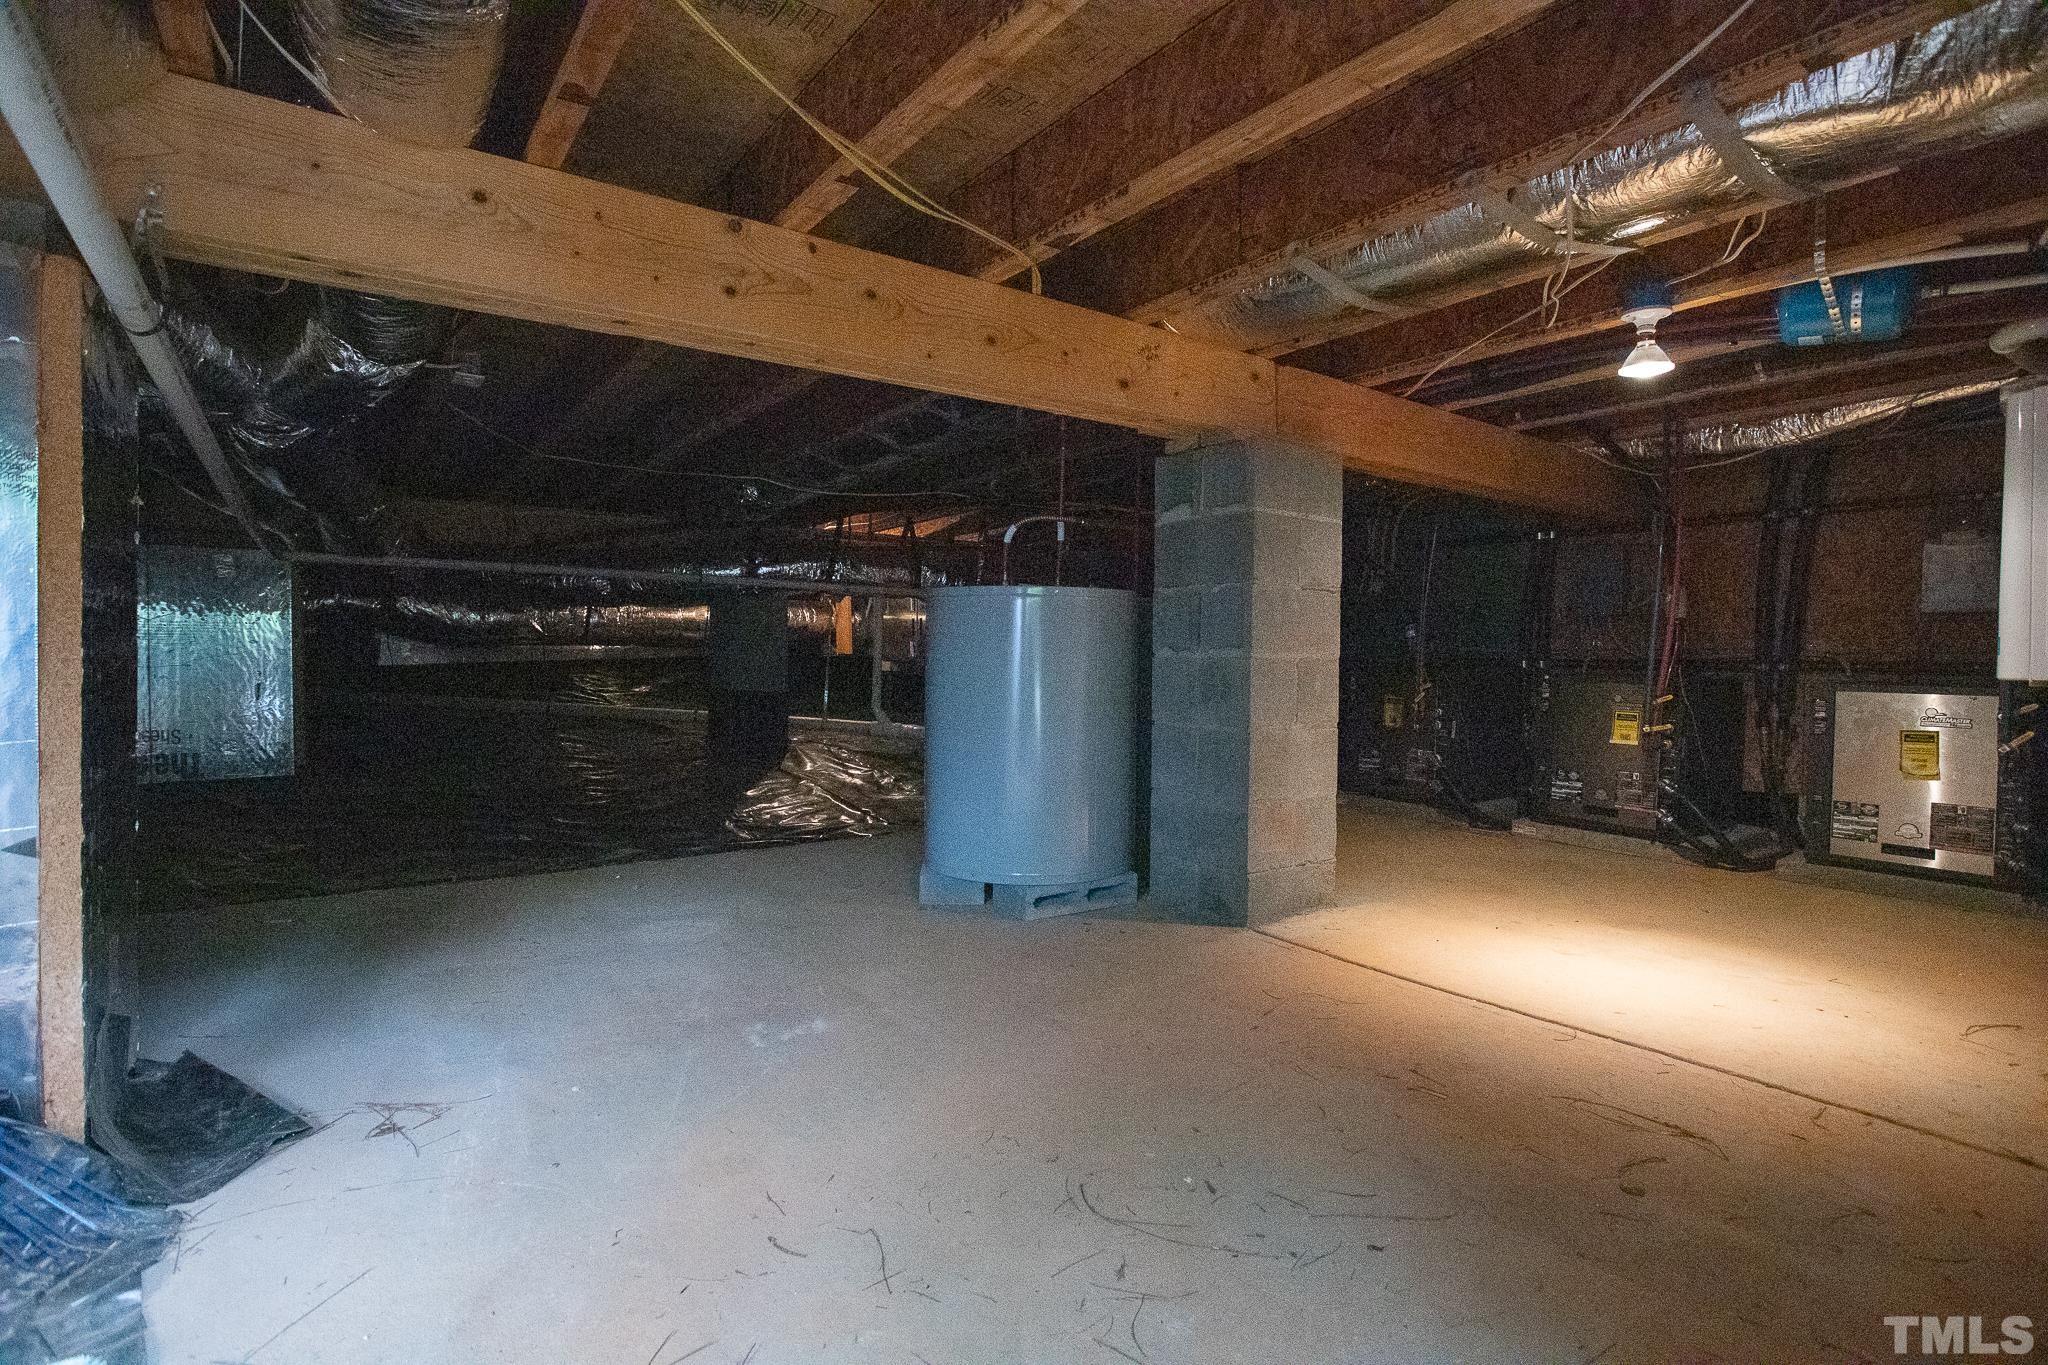 The sealed crawl space and geothermal HVAC system help keep your house energy efficient.